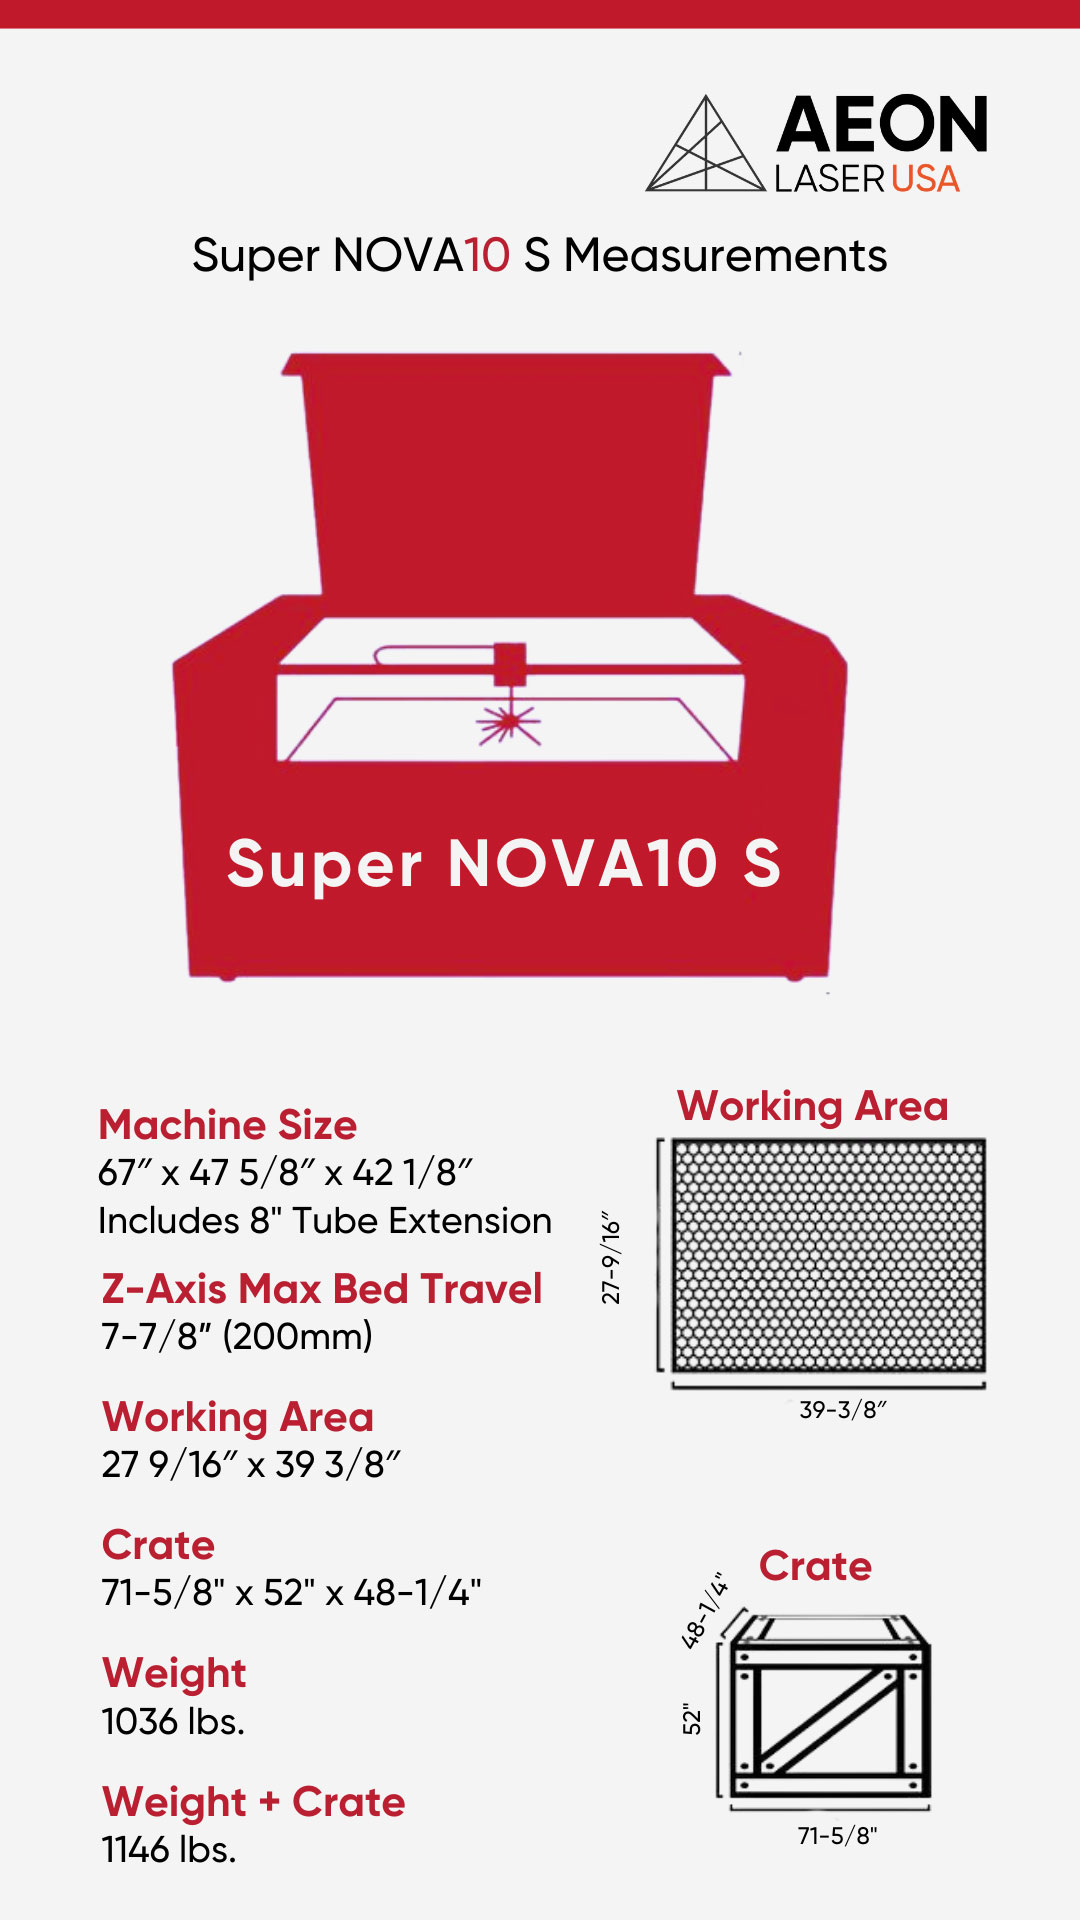 Graphic showing the dimensions of the Super NOVA 10 S laser, crate size, and weight info